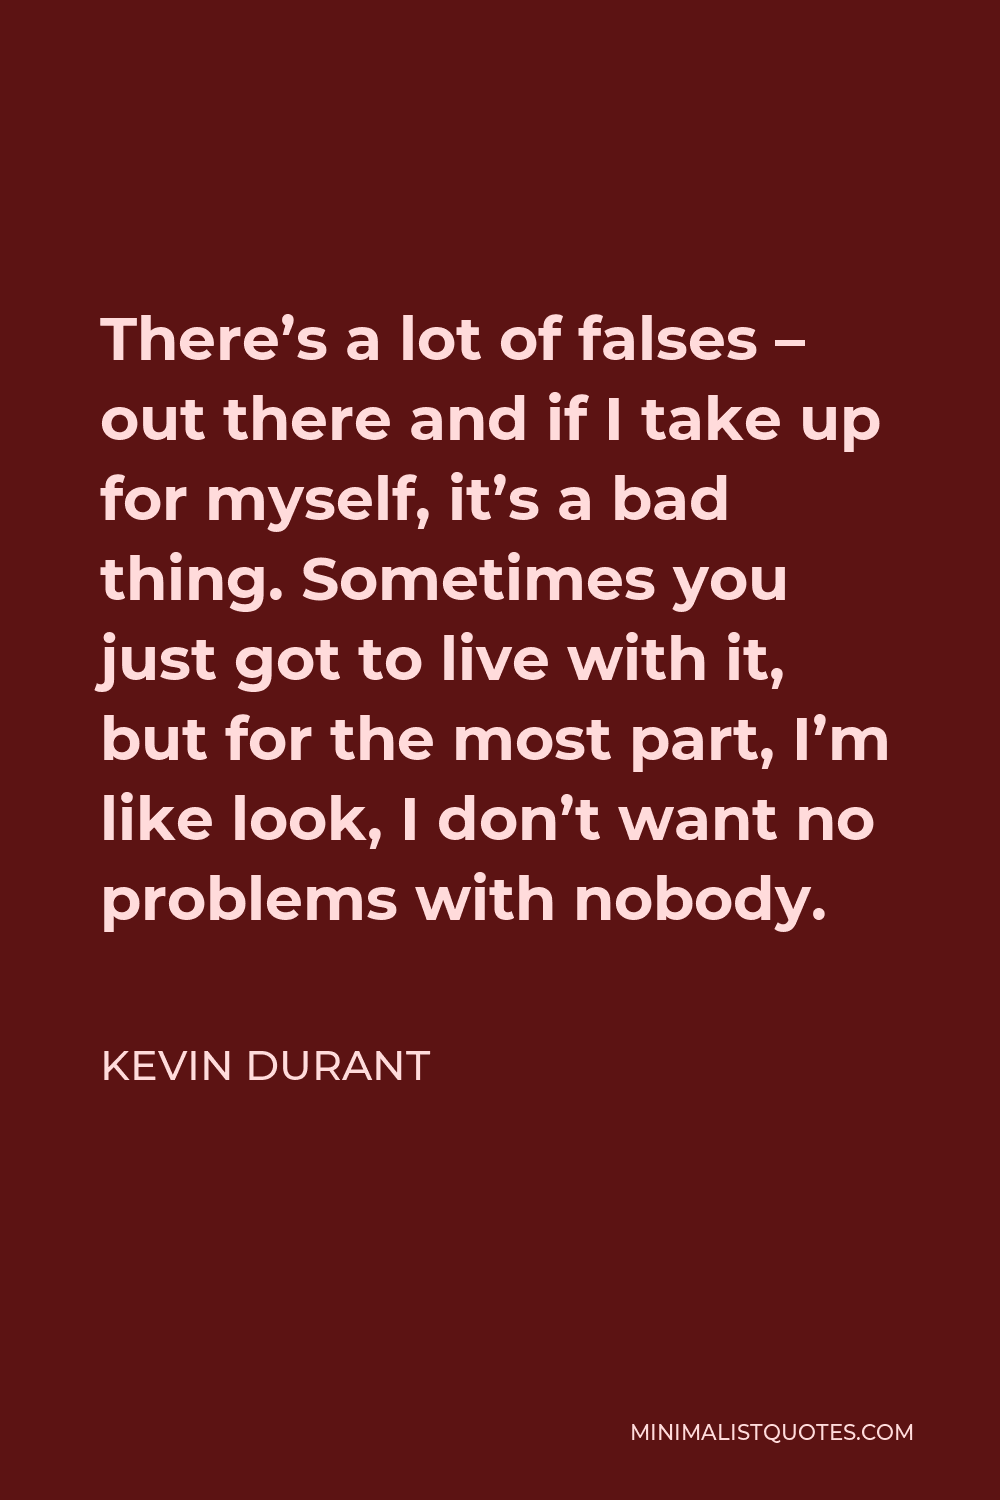 Kevin Durant Quote - There’s a lot of falses – out there and if I take up for myself, it’s a bad thing. Sometimes you just got to live with it, but for the most part, I’m like look, I don’t want no problems with nobody.